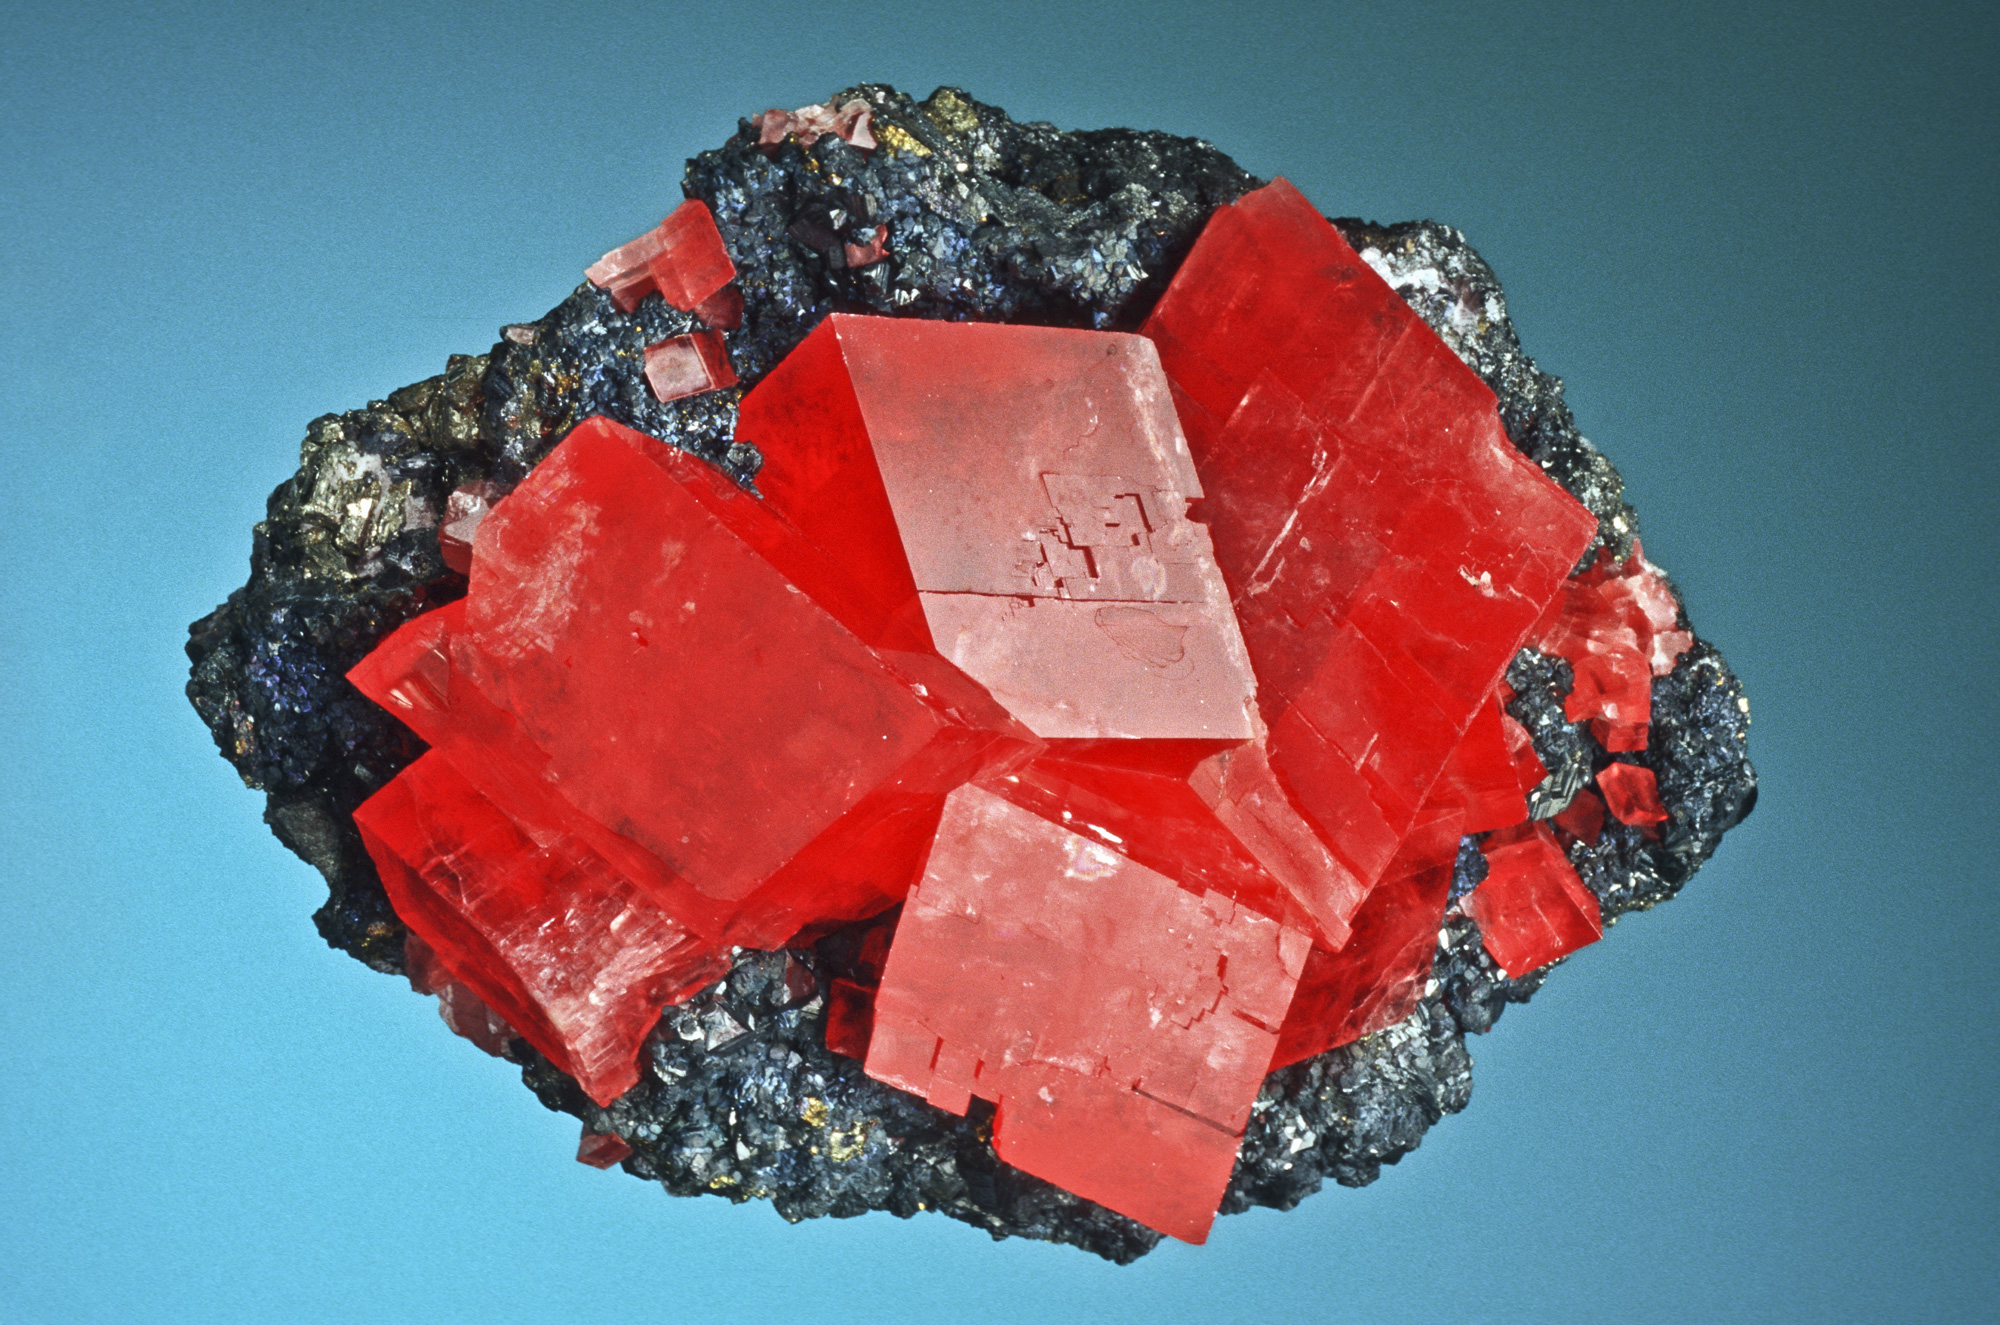 Rhodochrosite (red) on tetrahedrite (black) from the Sweet Home Mine, Alma, Park County, Colorado. Specimen provided by Dave Bunk. Photo credit: Jeff Scovil.